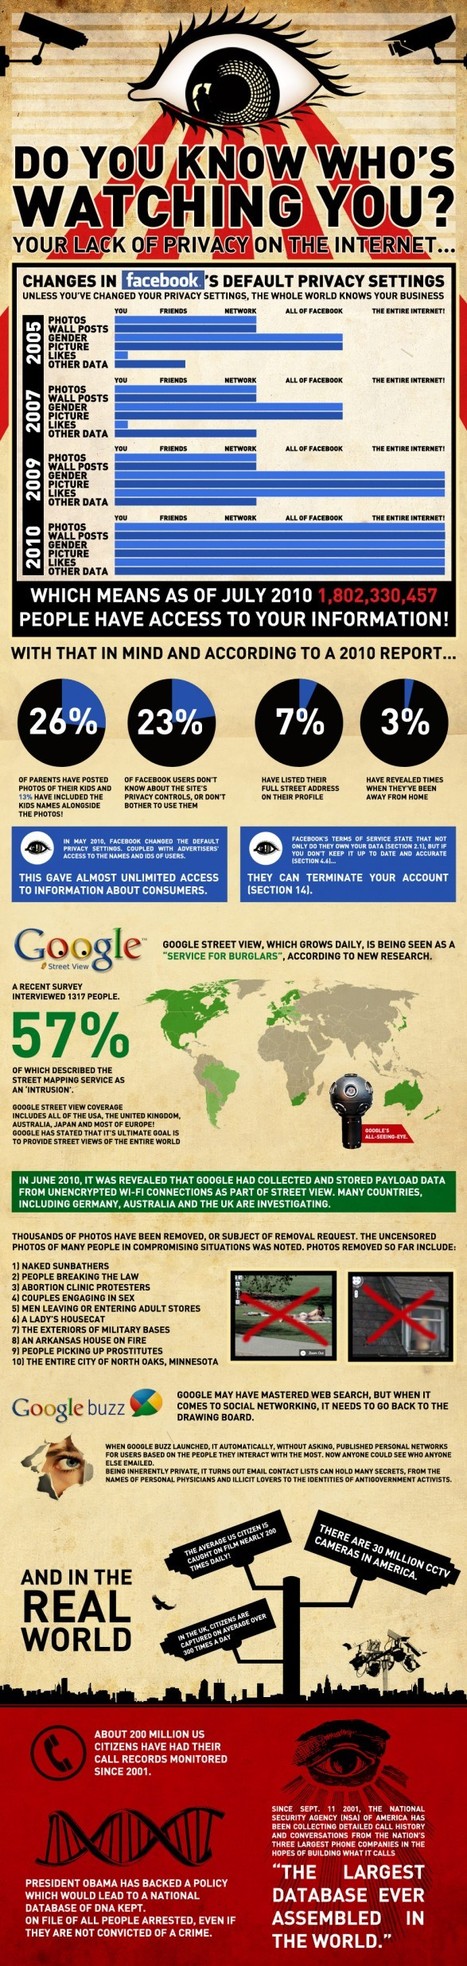 Do You Know Who’s Watching You? [INFOGRAPHIC] | information analyst | Scoop.it